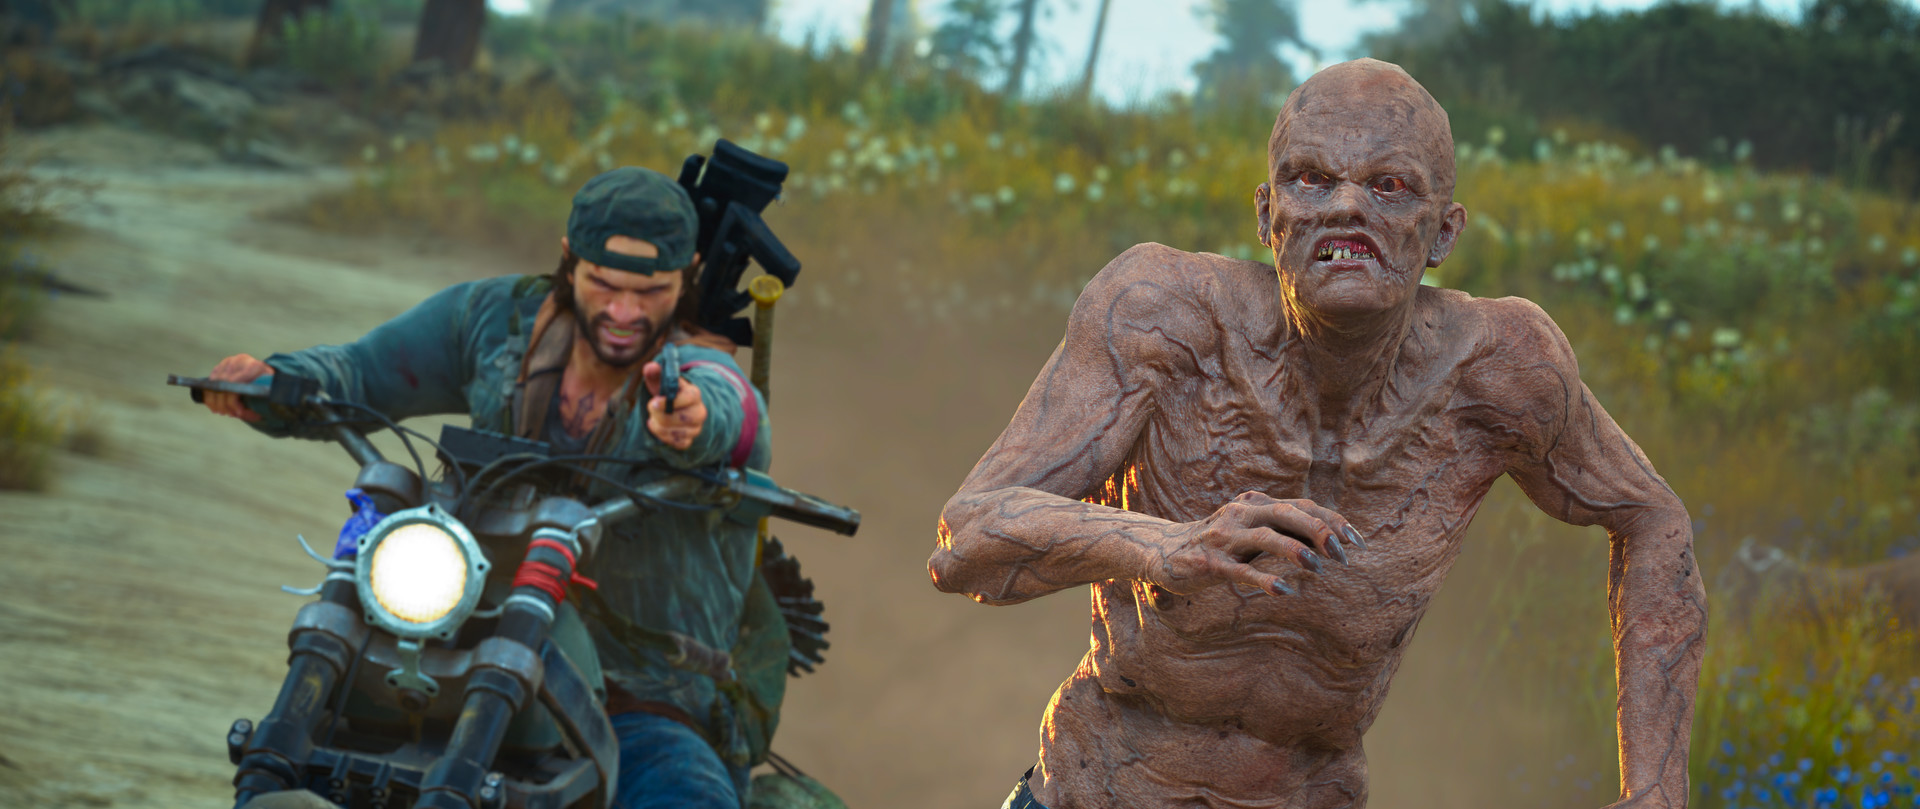 Days Gone PlayStation 4 Account Pixelpuffin.net Activation Link